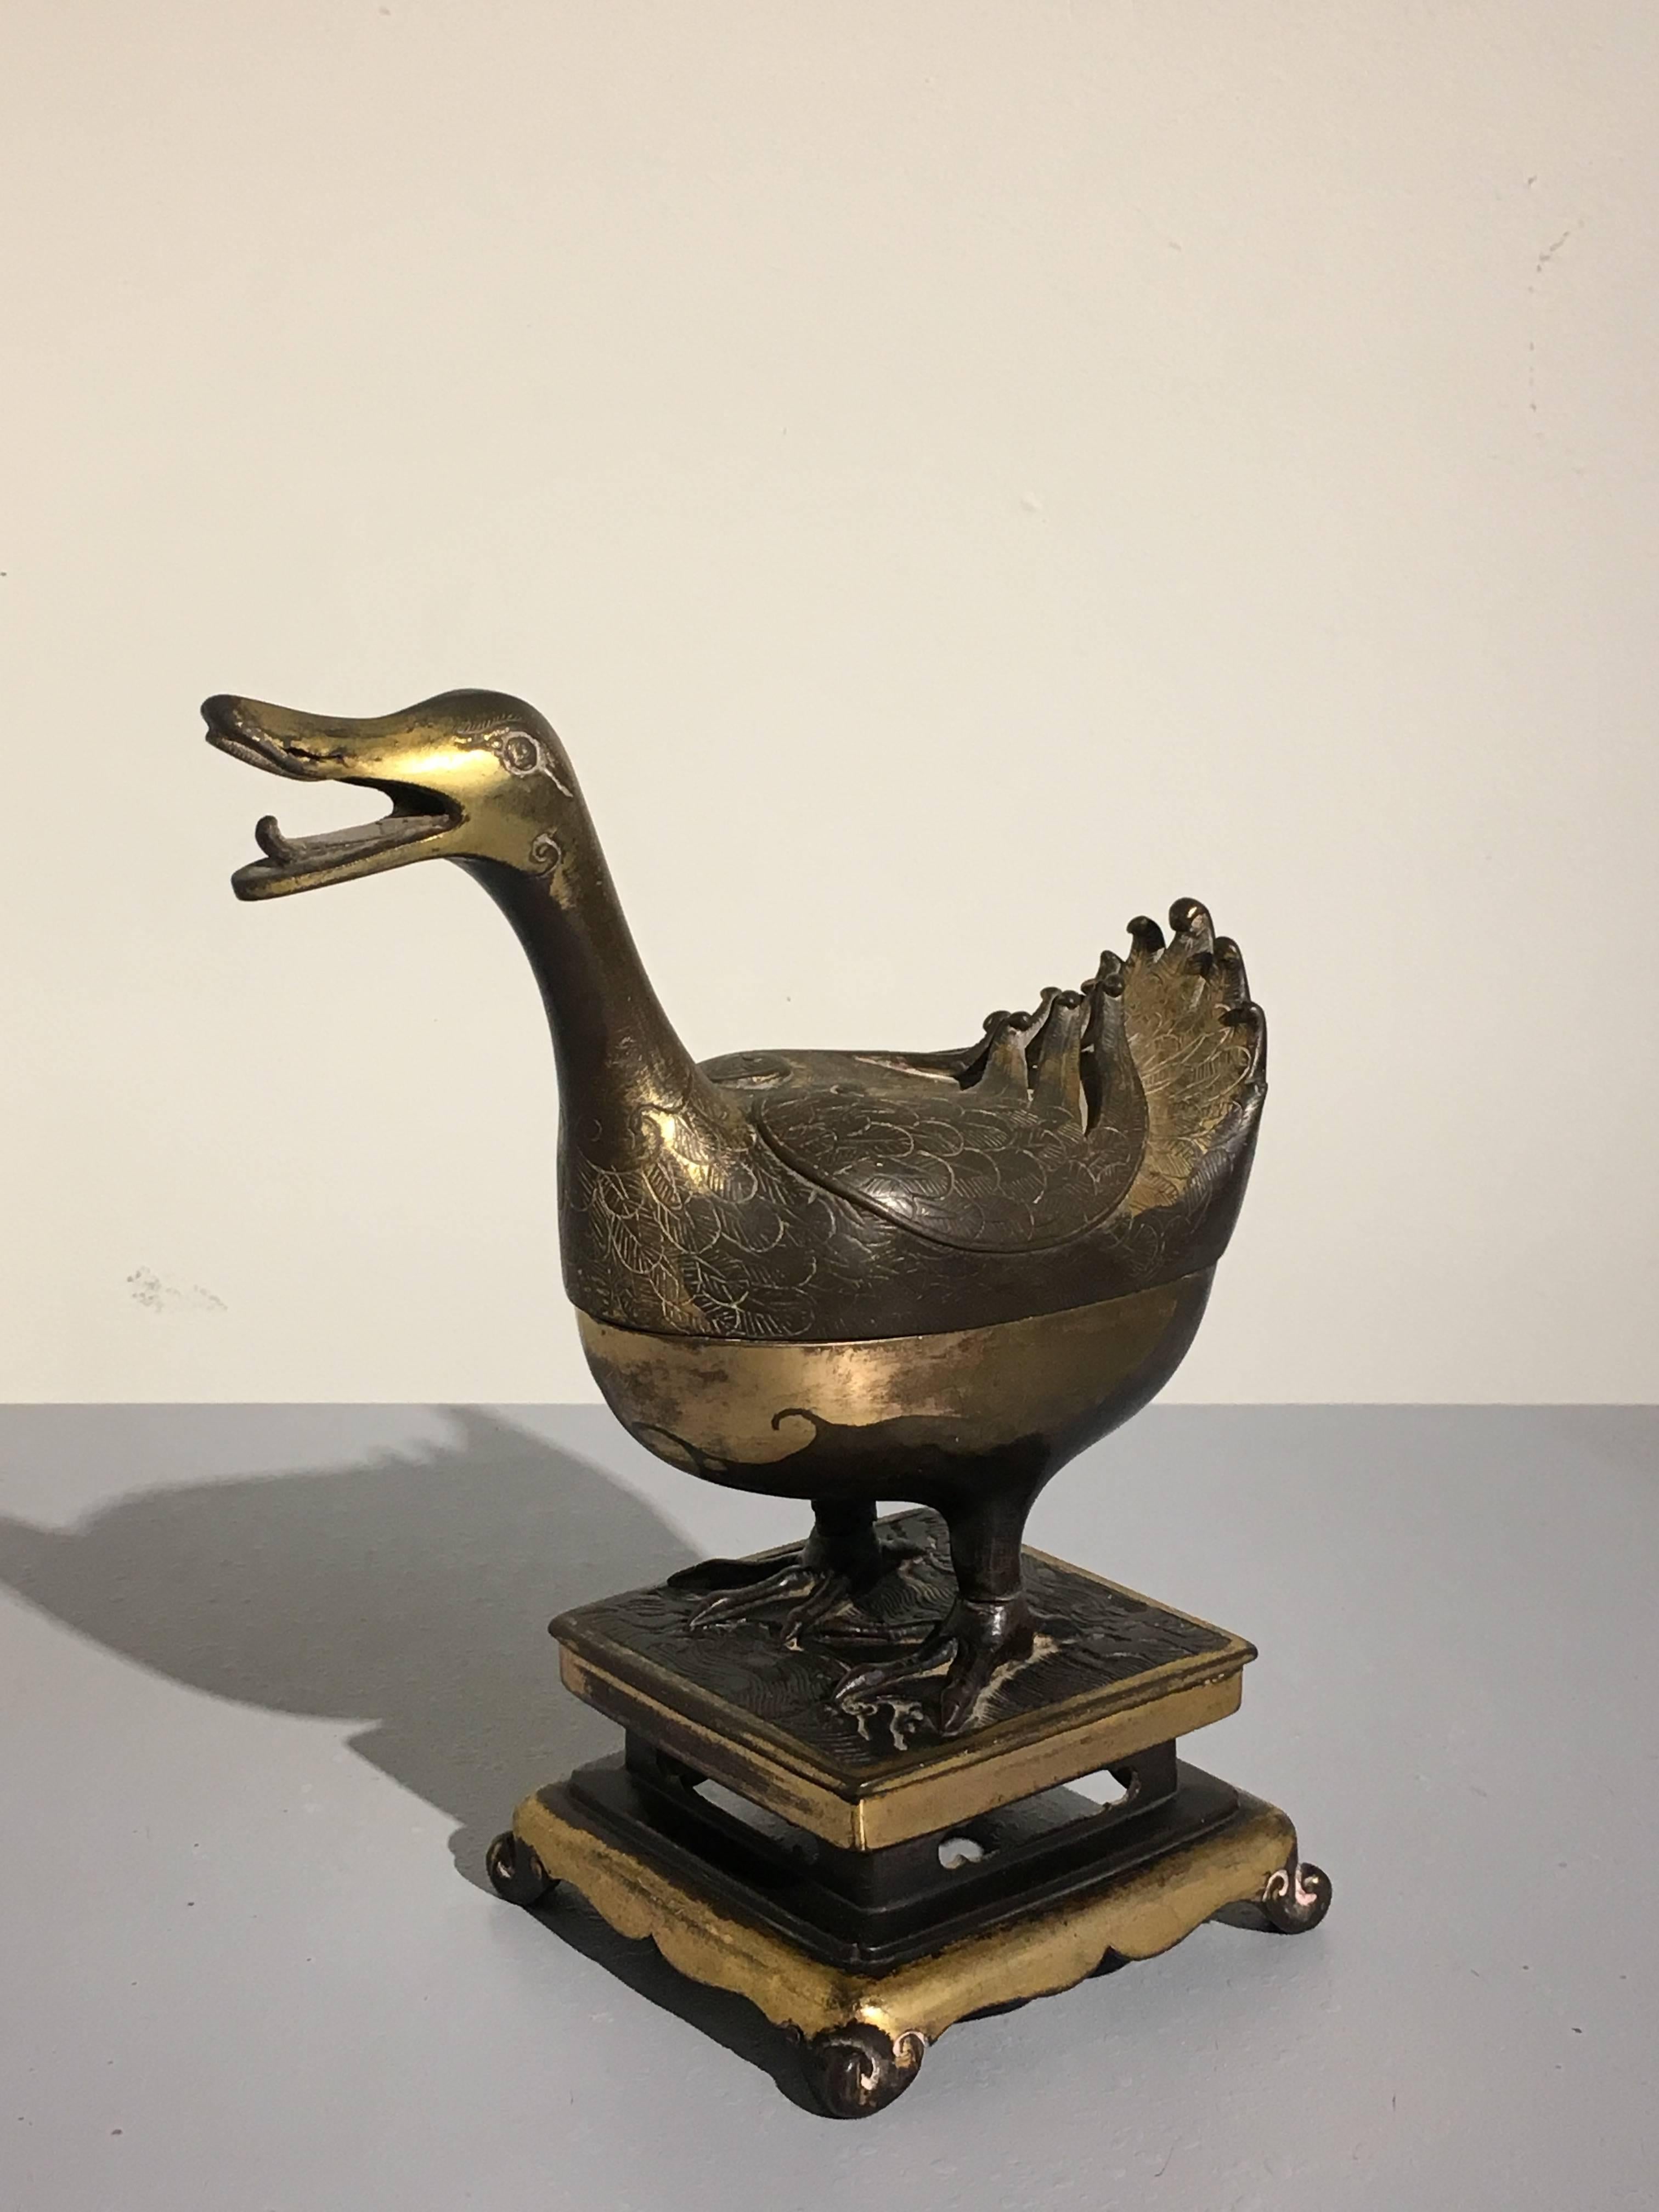 Cast 17th Century Chinese Late Ming Dynasty Gilt Bronze Duck form Censer